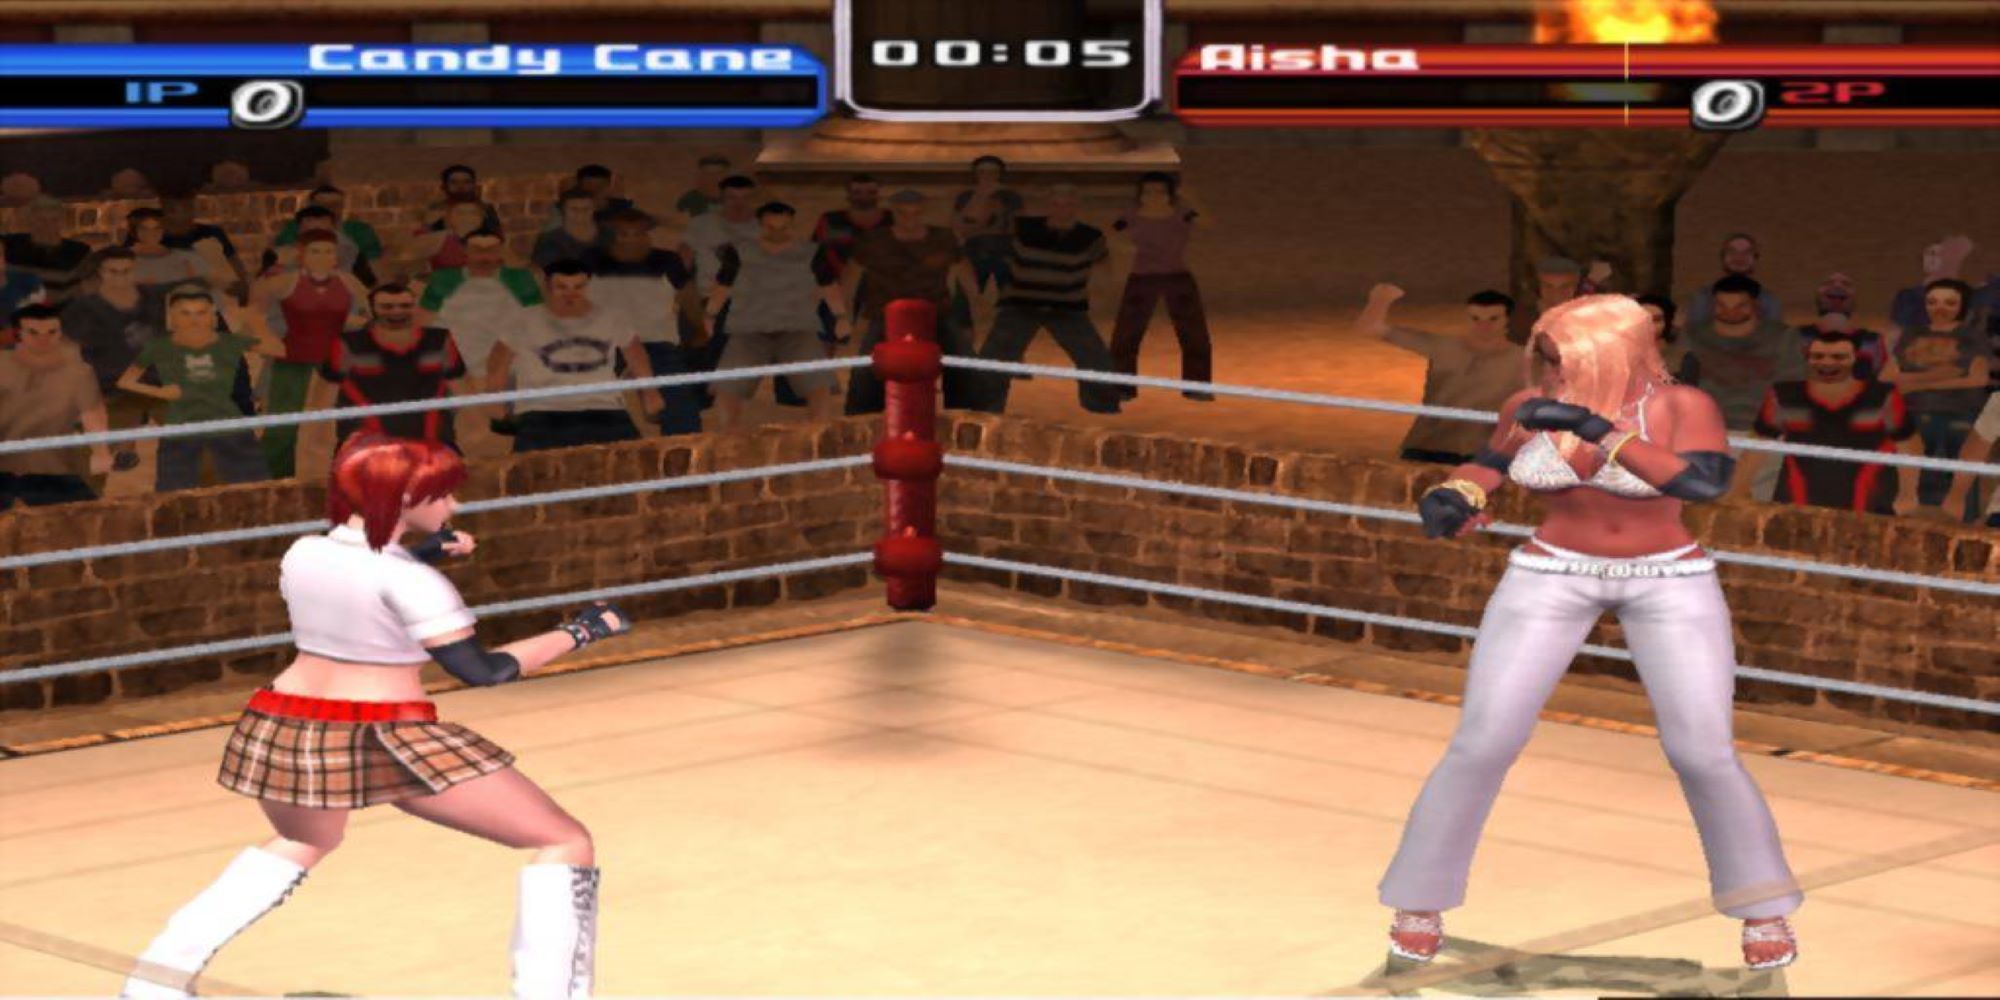 A plaid-skirted wrestler, Candy Cane, faces a J-Lo styled Aisha in a tense wrestling match in Rumble Roses.